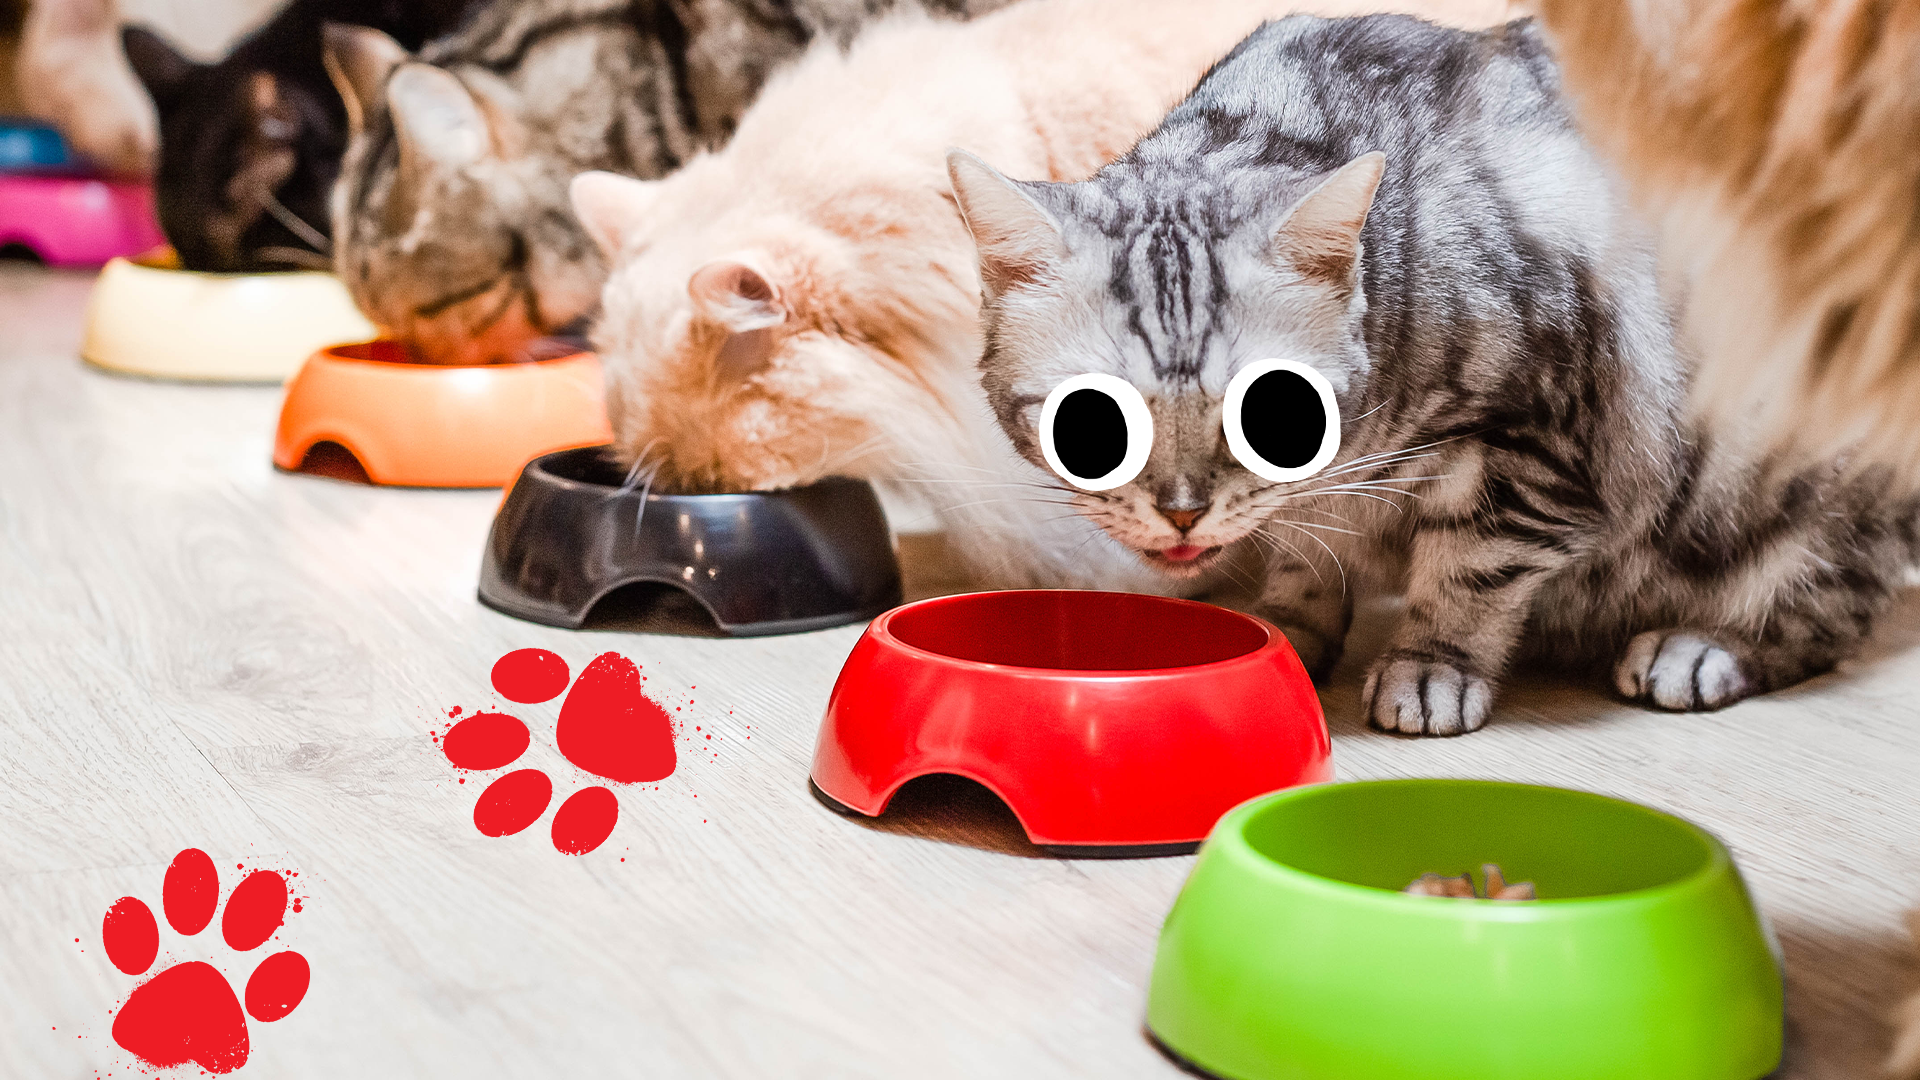 A group of cats eat from a variety of bowls